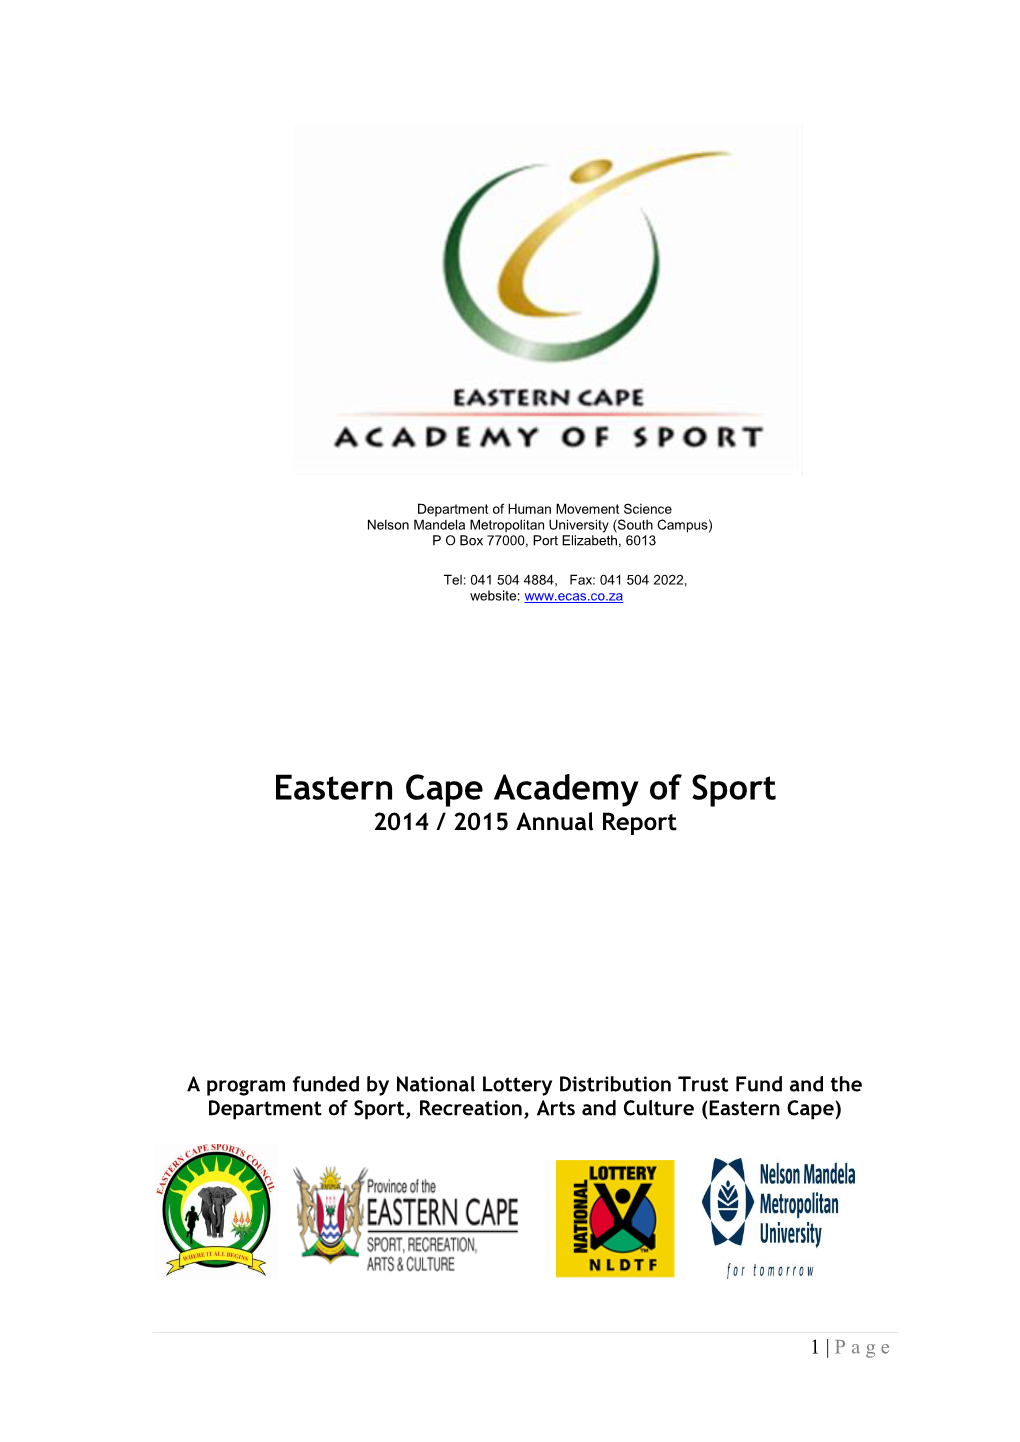 Eastern Cape Academy of Sport 2014 / 2015 Annual Report